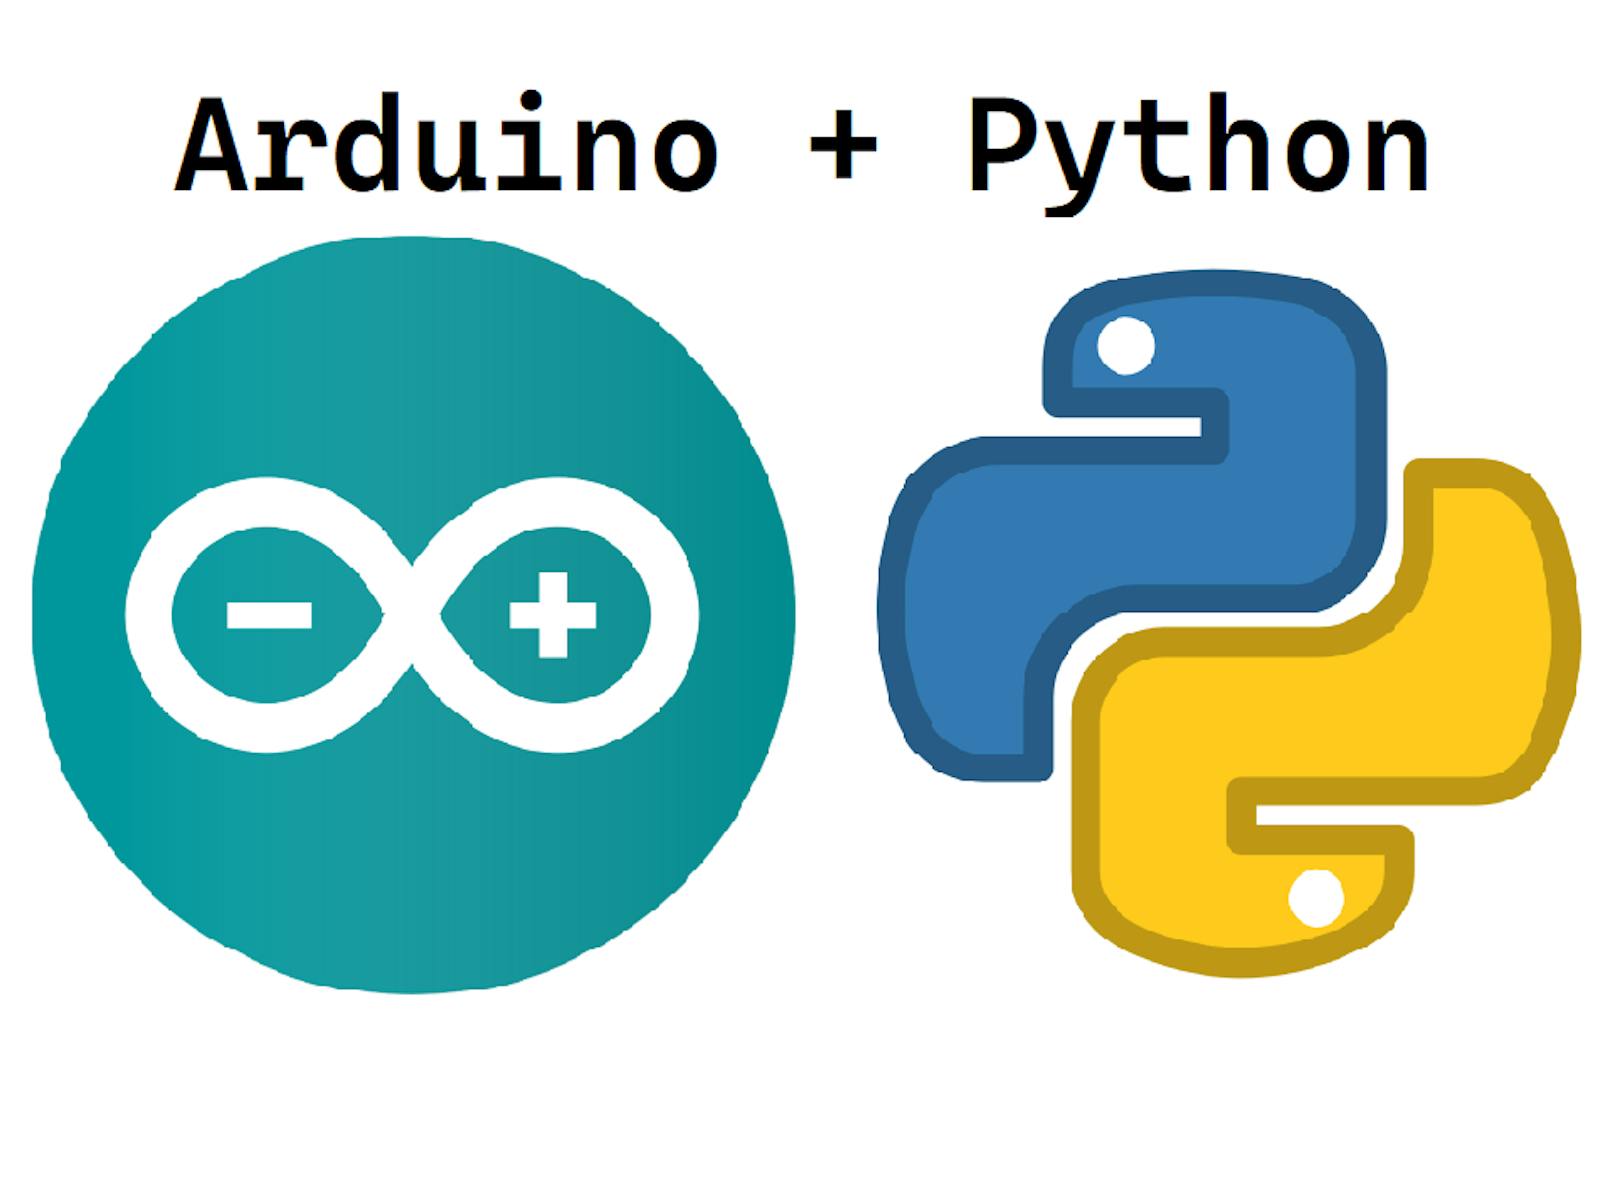 Porting your code to Python 3